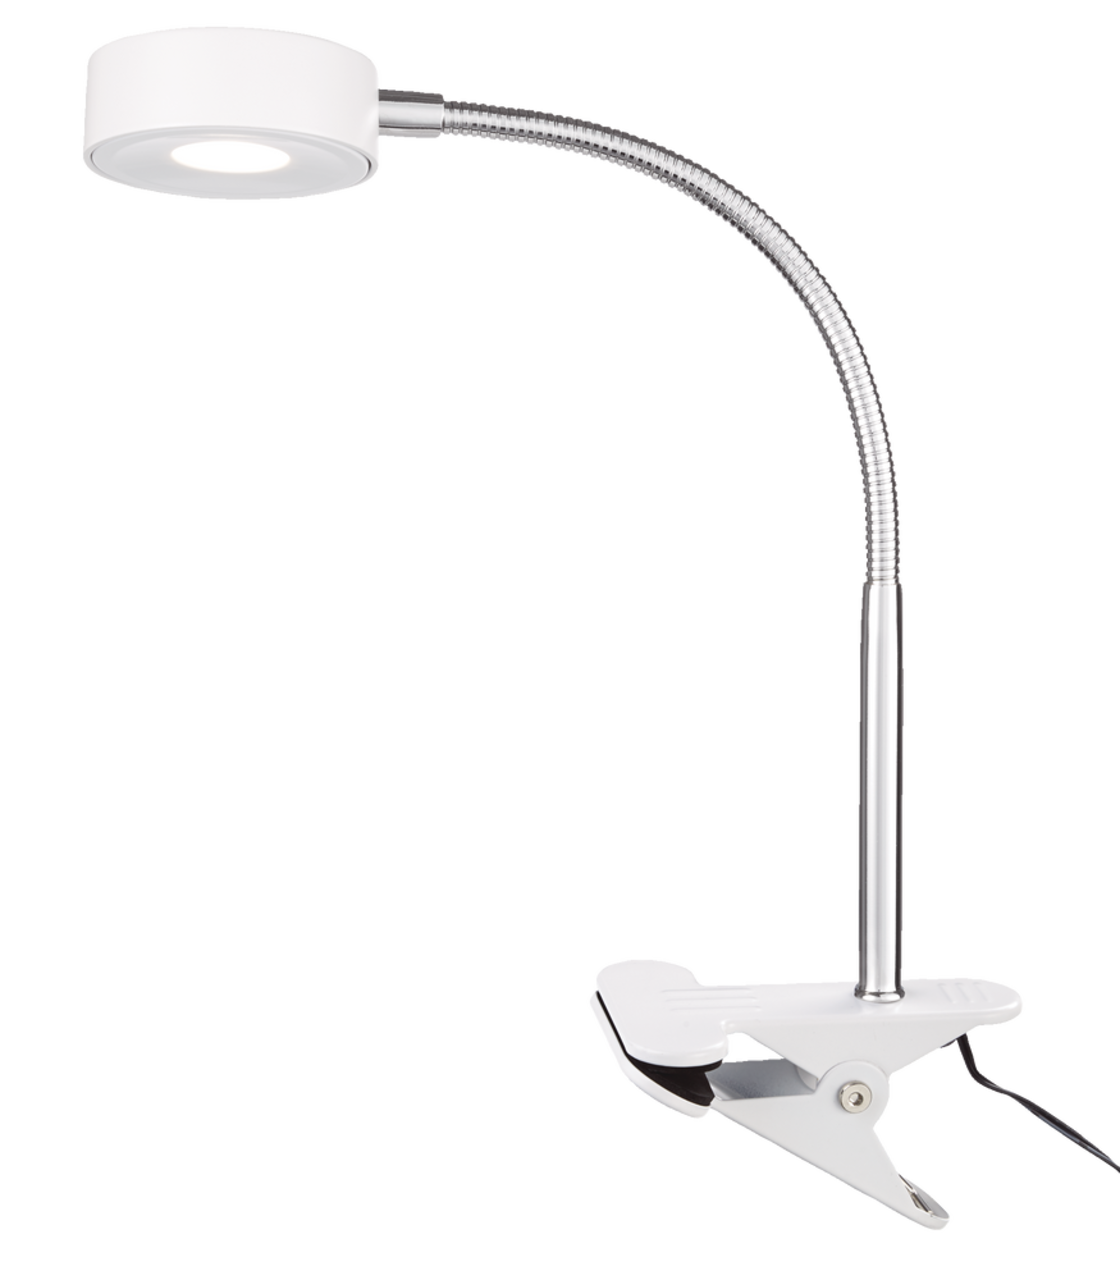 https://media-www.canadiantire.ca/product/living/home-decor/lighting/0529323/noma-led-white-clip-desk-lamp-6f50e4bd-4423-471a-b7cd-302a08d336ac.png?imdensity=1&imwidth=640&impolicy=mZoom